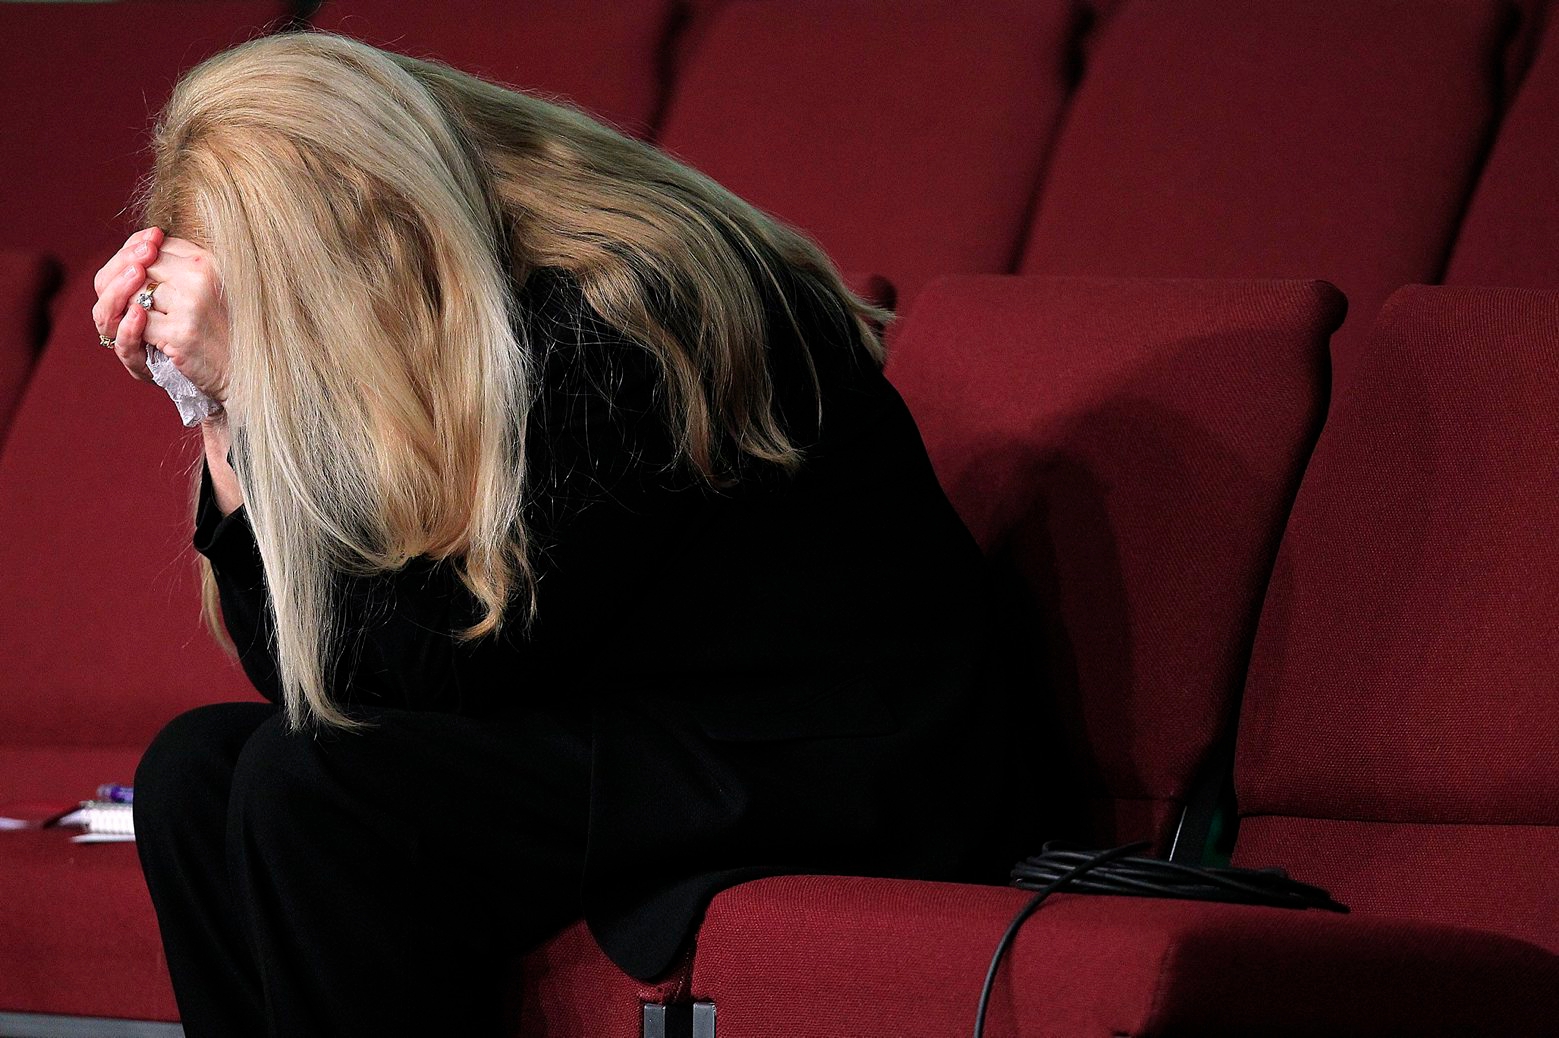 Gayle Inge, mother of Mindy McCready, prays with the congregation at the end of the funeral service for her daughter at the Crossroads Baptist Church in Fort Myers, Fla., on Tuesday, Feb. 26, 2013.  McCready committed suicide Feb. 17 at her home in Arkansas, days after leaving a court-ordered substance abuse program. (AP Photo/Naples Daily News, Corey Perrine)  FORT MYERS OUT Mindy McCready Funeral